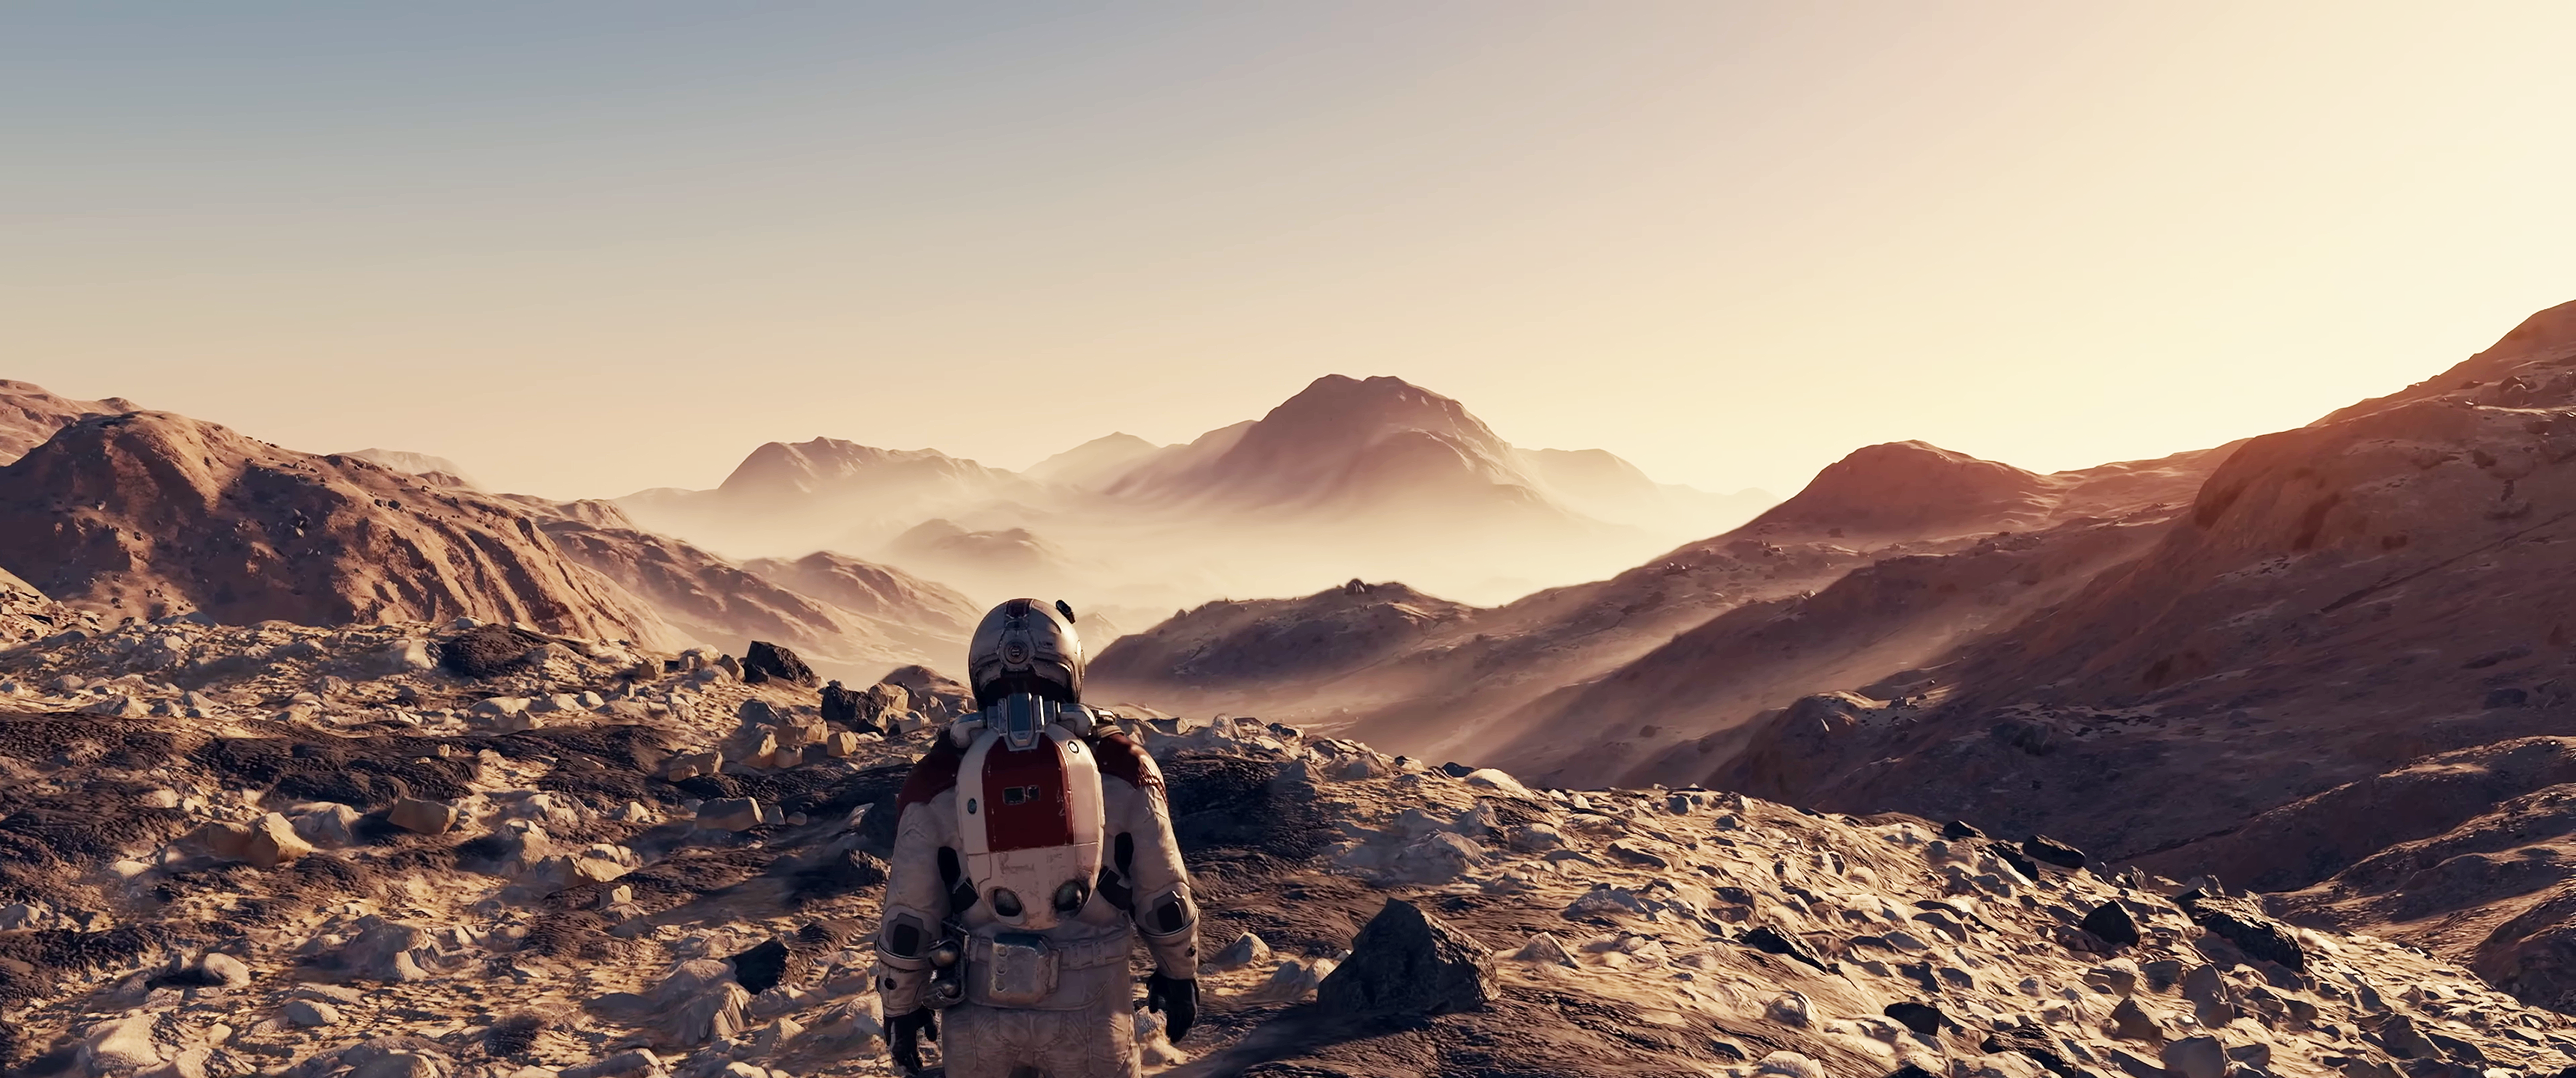 Starfield Bethesda Softworks Space Video Game Art Rocks Video Games Mountains Landscape Spacesuit 3440x1440